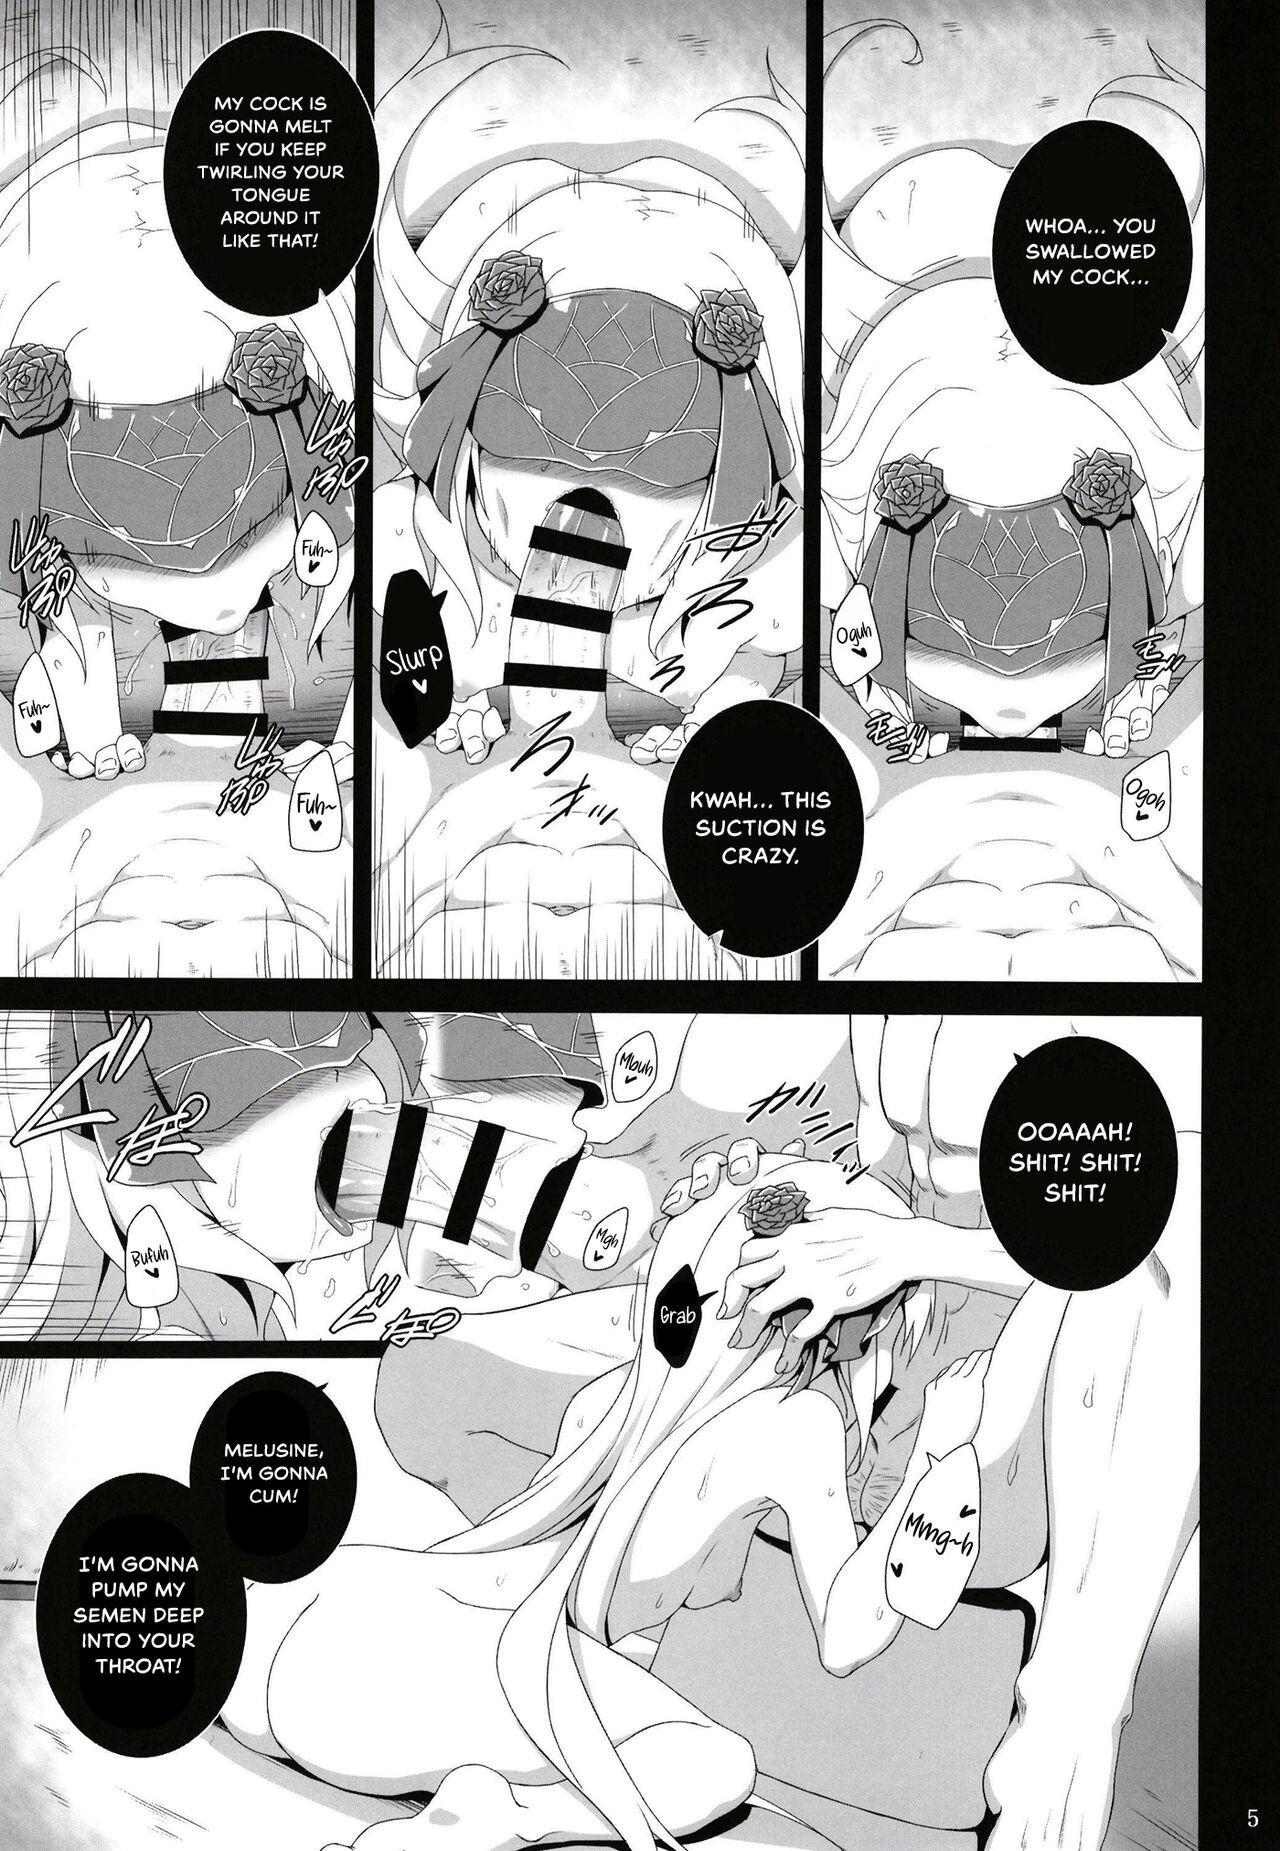 Gym Melusine to Ofuro de Ichaicha suru Hon | A Book About Making Love With Melusine In The Bath - Fate grand order Toilet - Page 7